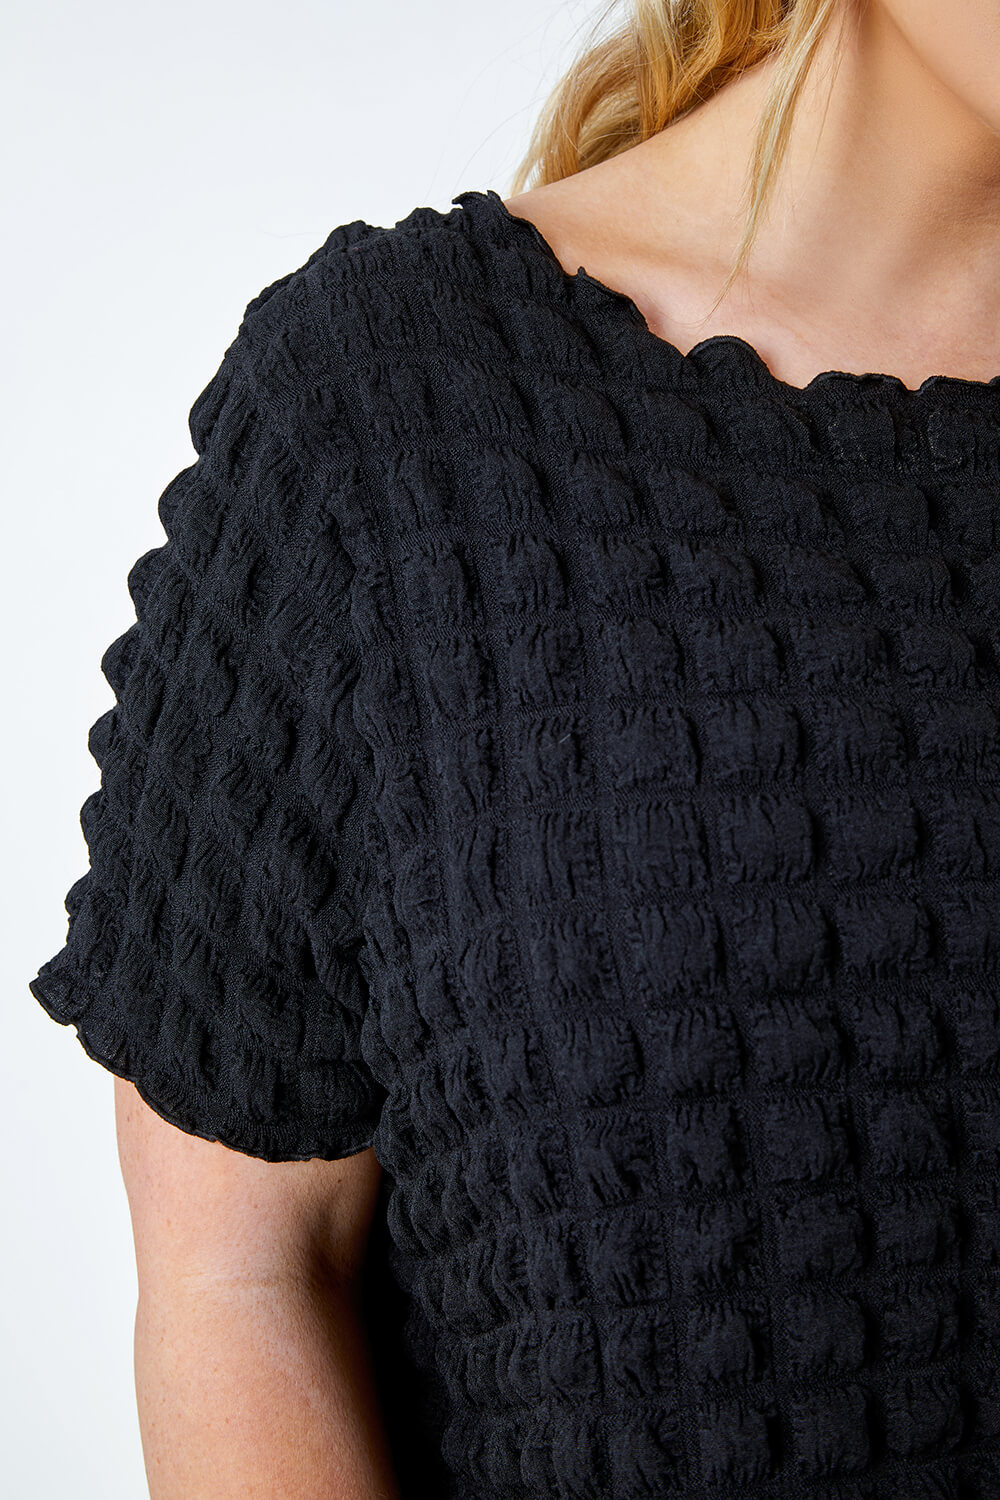 Black Curve Square Textured Stretch Top, Image 5 of 5